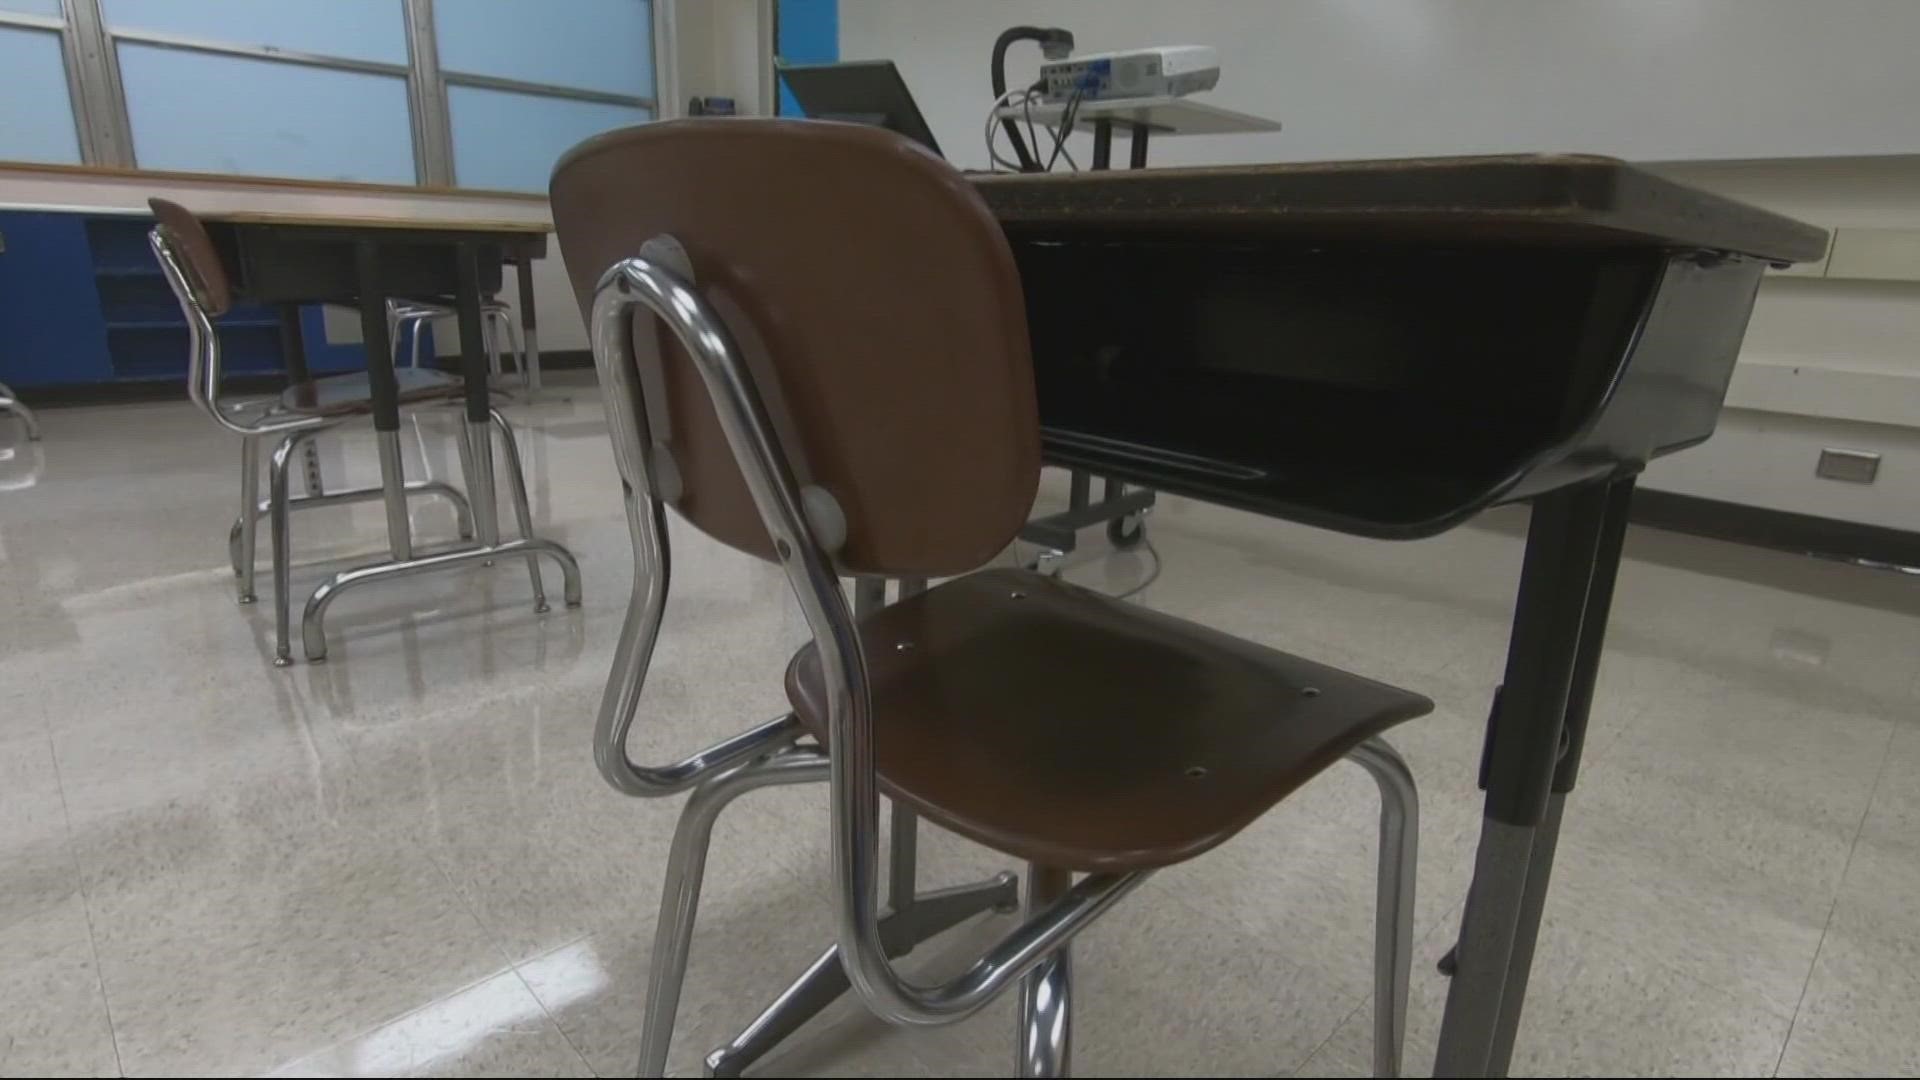 Four teachers from the Portland area spoke to KGW about the struggle of teaching during the latest wave of COVID-19. Christine Pitawanich reports.